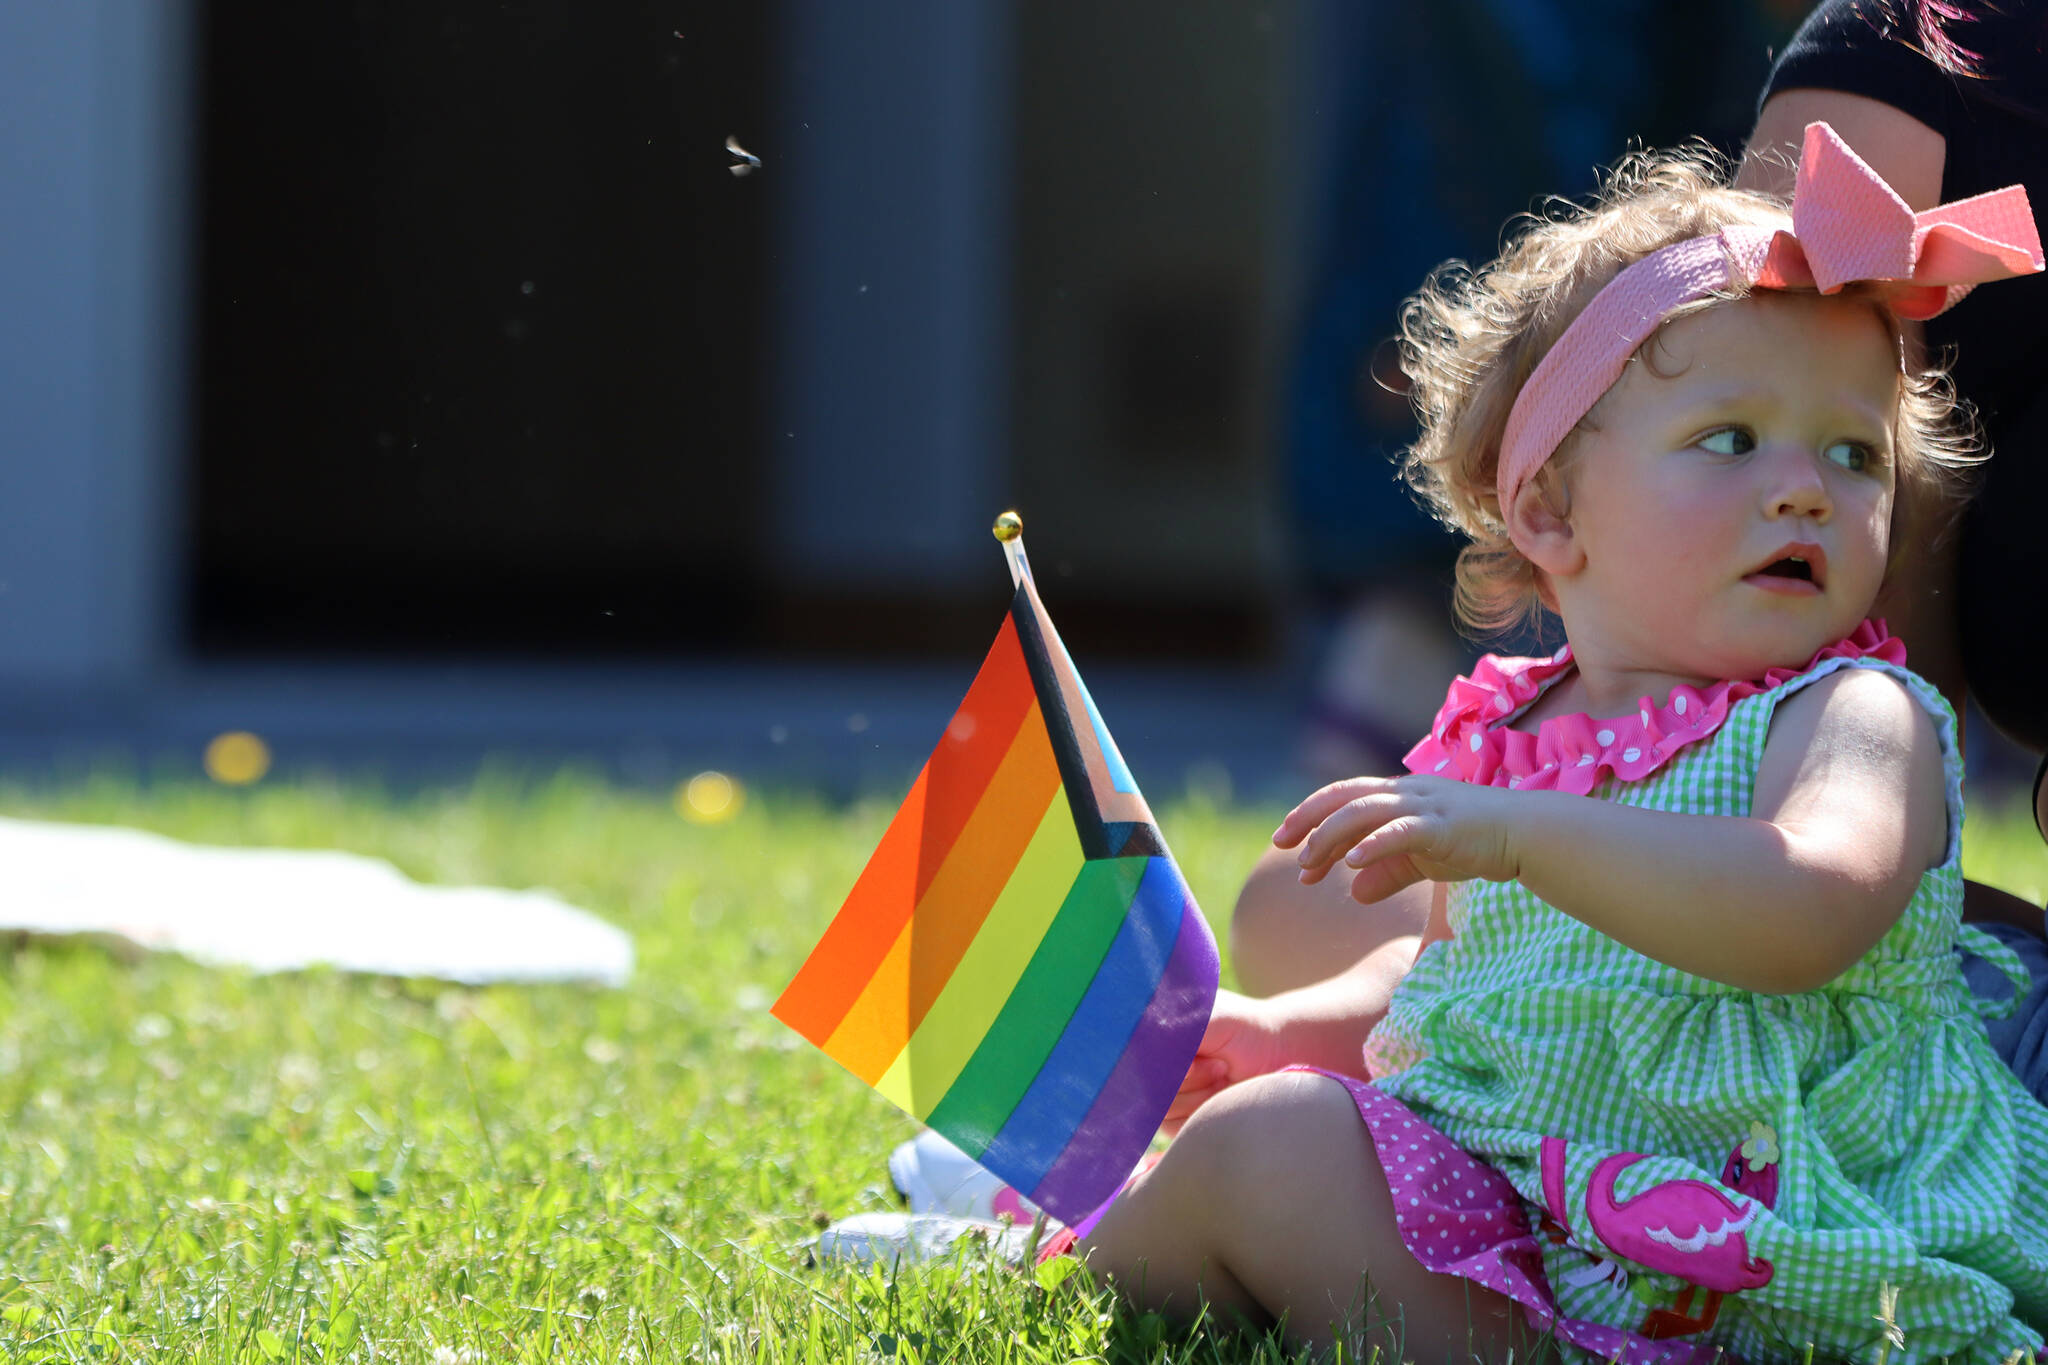 Aires Kelley, 1, holds a Pride flag Saturday during Drag Storytime at the Mendenhall Valley Public Library, one of many LGBTQ+ friendly events held in Alaska’s capital city. For the second year in a row, the City and Borough of Juneau received a perfect score on the Human Rights Campaign’s 2022 Municipality Equality Index scorecard. (Ben Hohenstatt / Juneau Empire File)